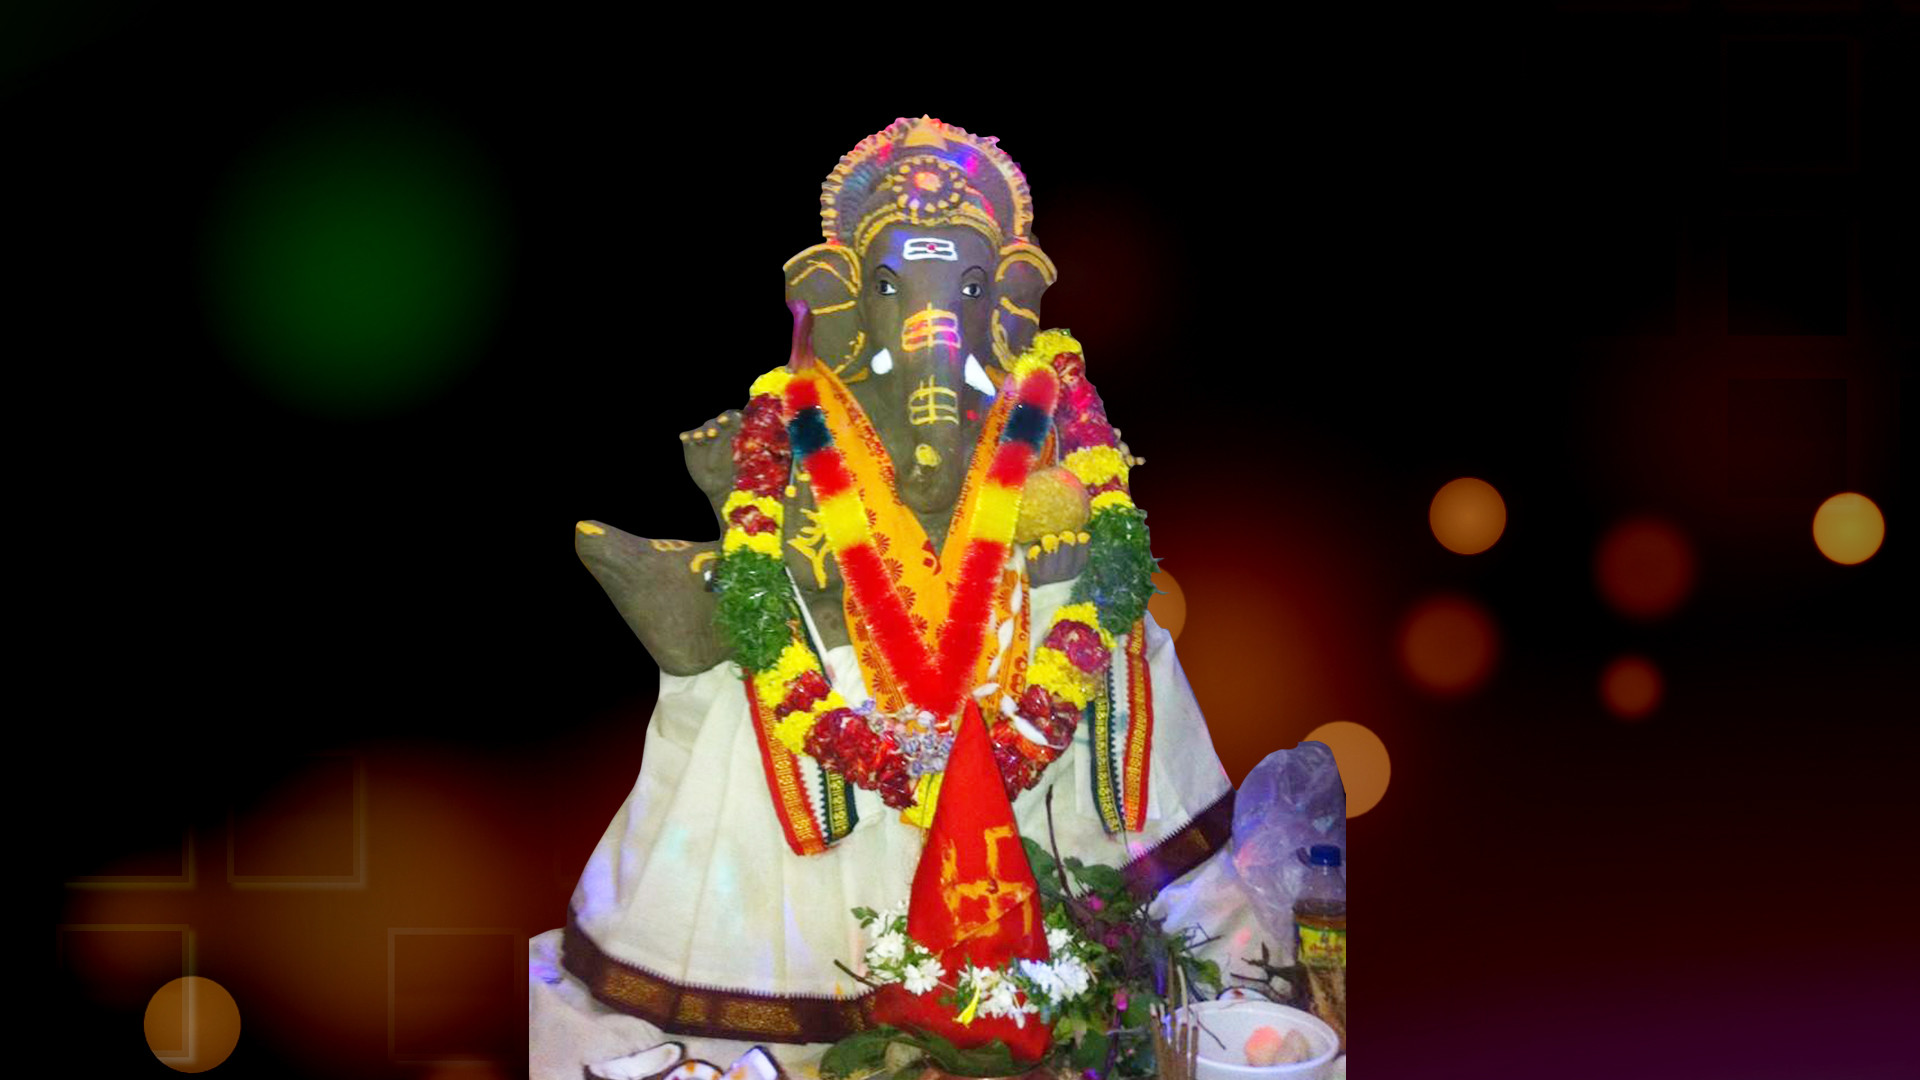 1920x1080 Lord Ganesha Stock Photos and Images Free Downloads